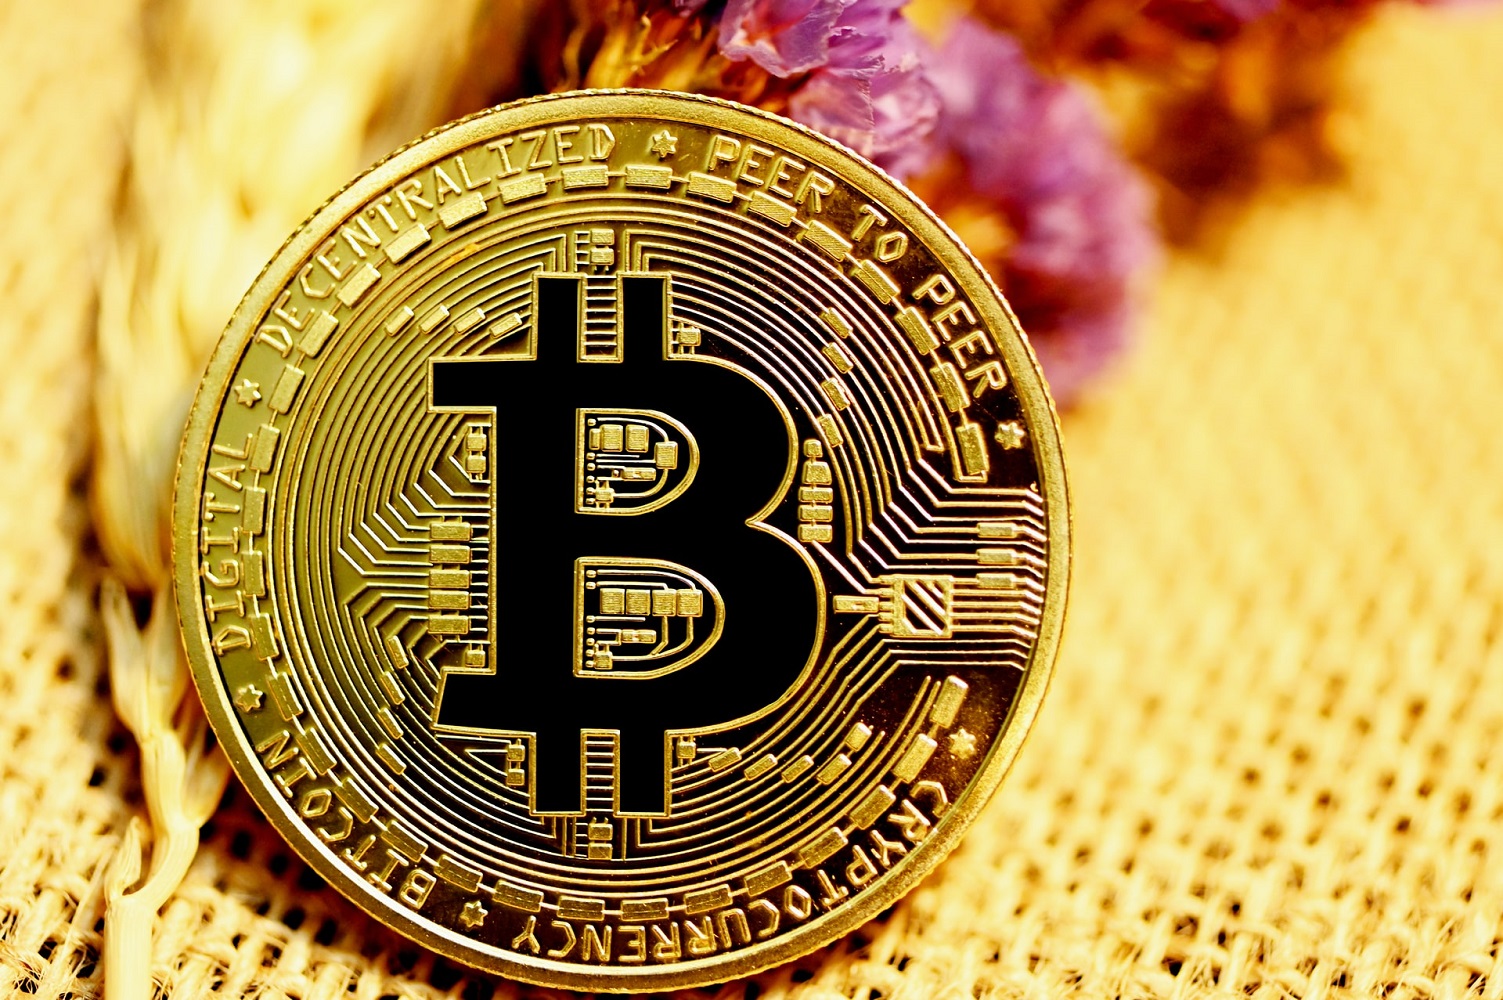 A gold Bitcoin, with the words ‘cryptocurrency, digital, decentralized, peer to peer’ engraved around